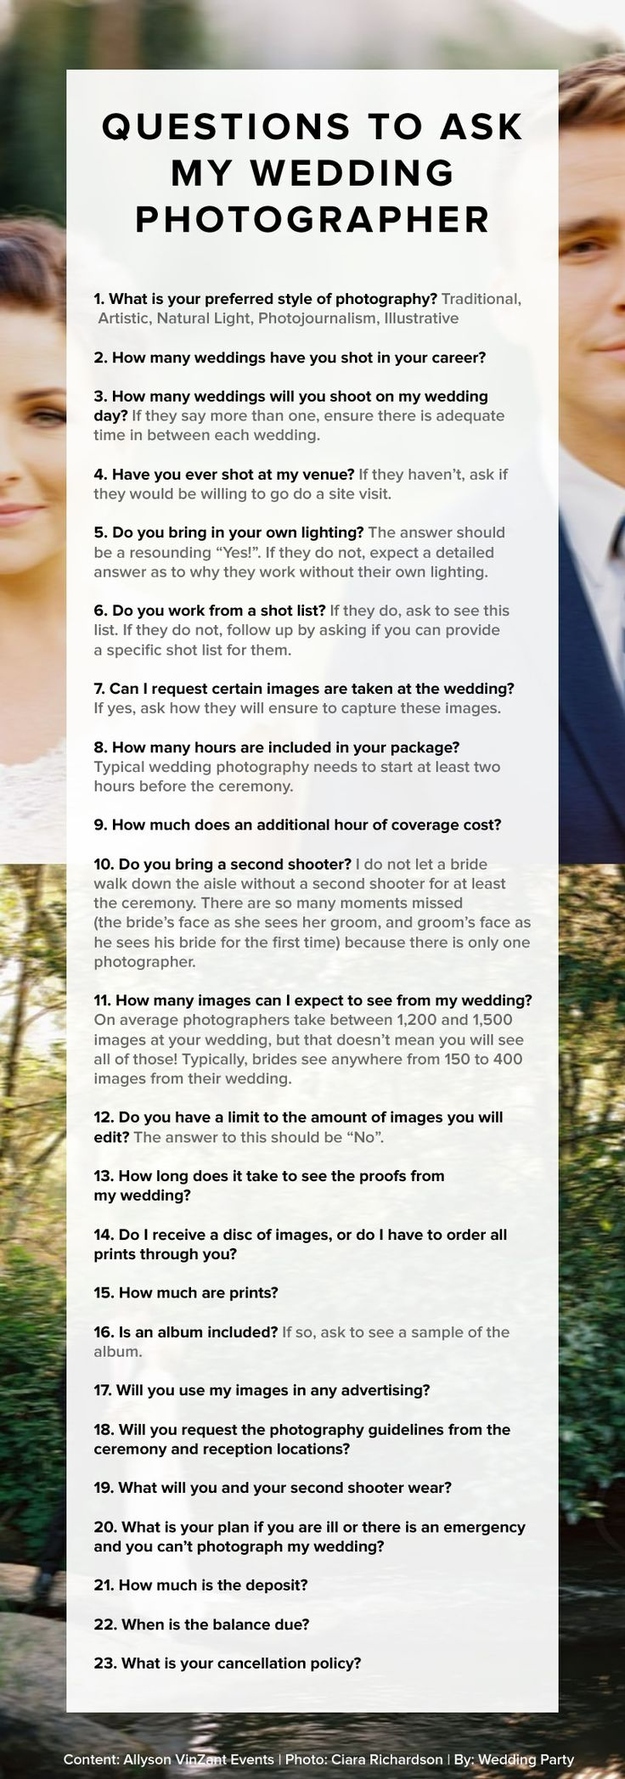 wedding planning tips - questions to ask my wedding photographer